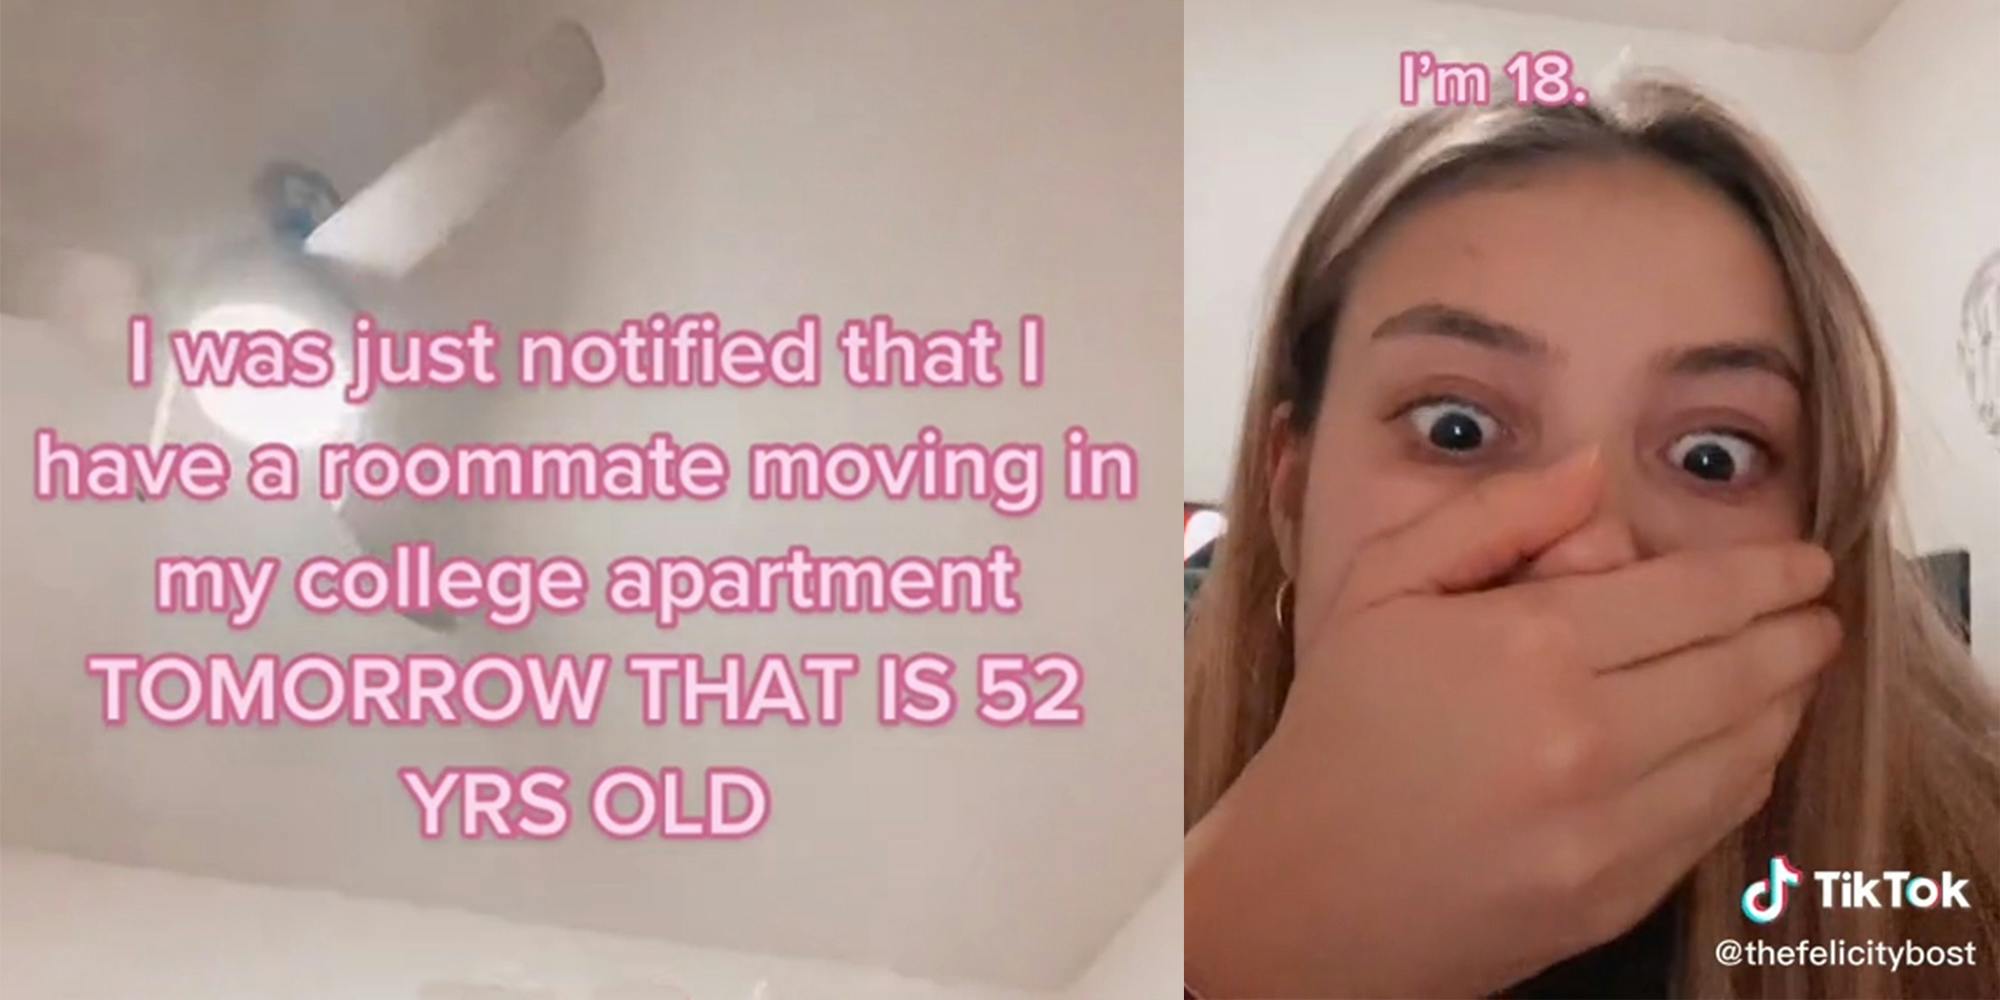 ceiling fan with caption "I was just notified that I have a roommate moving in my college apartment TOMORROW THAT IS 52 YRS OLD" (l) young woman covering her mouth with wide eyes and caption "i'm 18" (r)